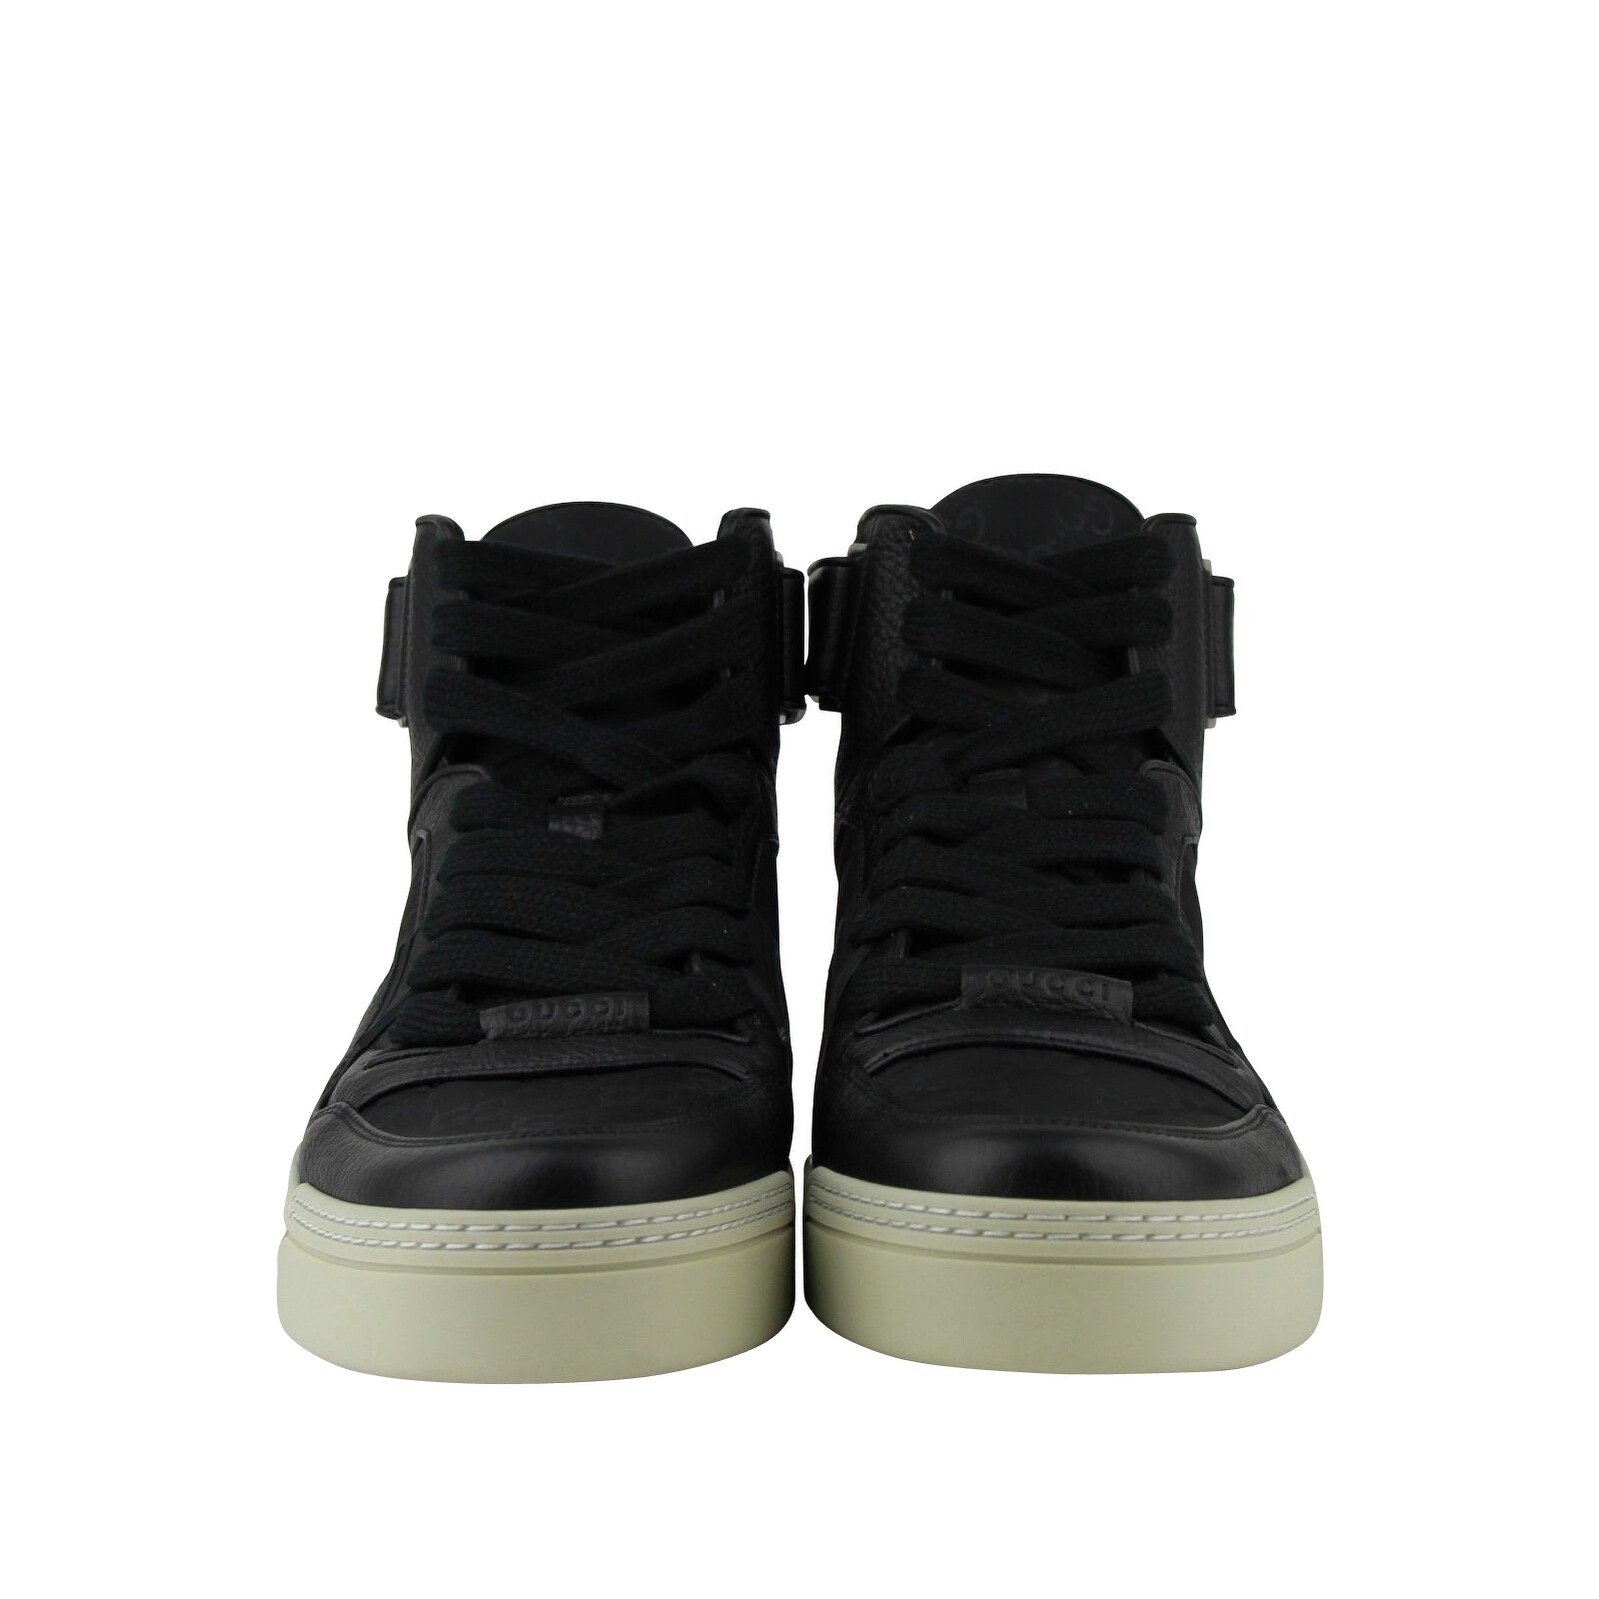 black high top gucci sneakers